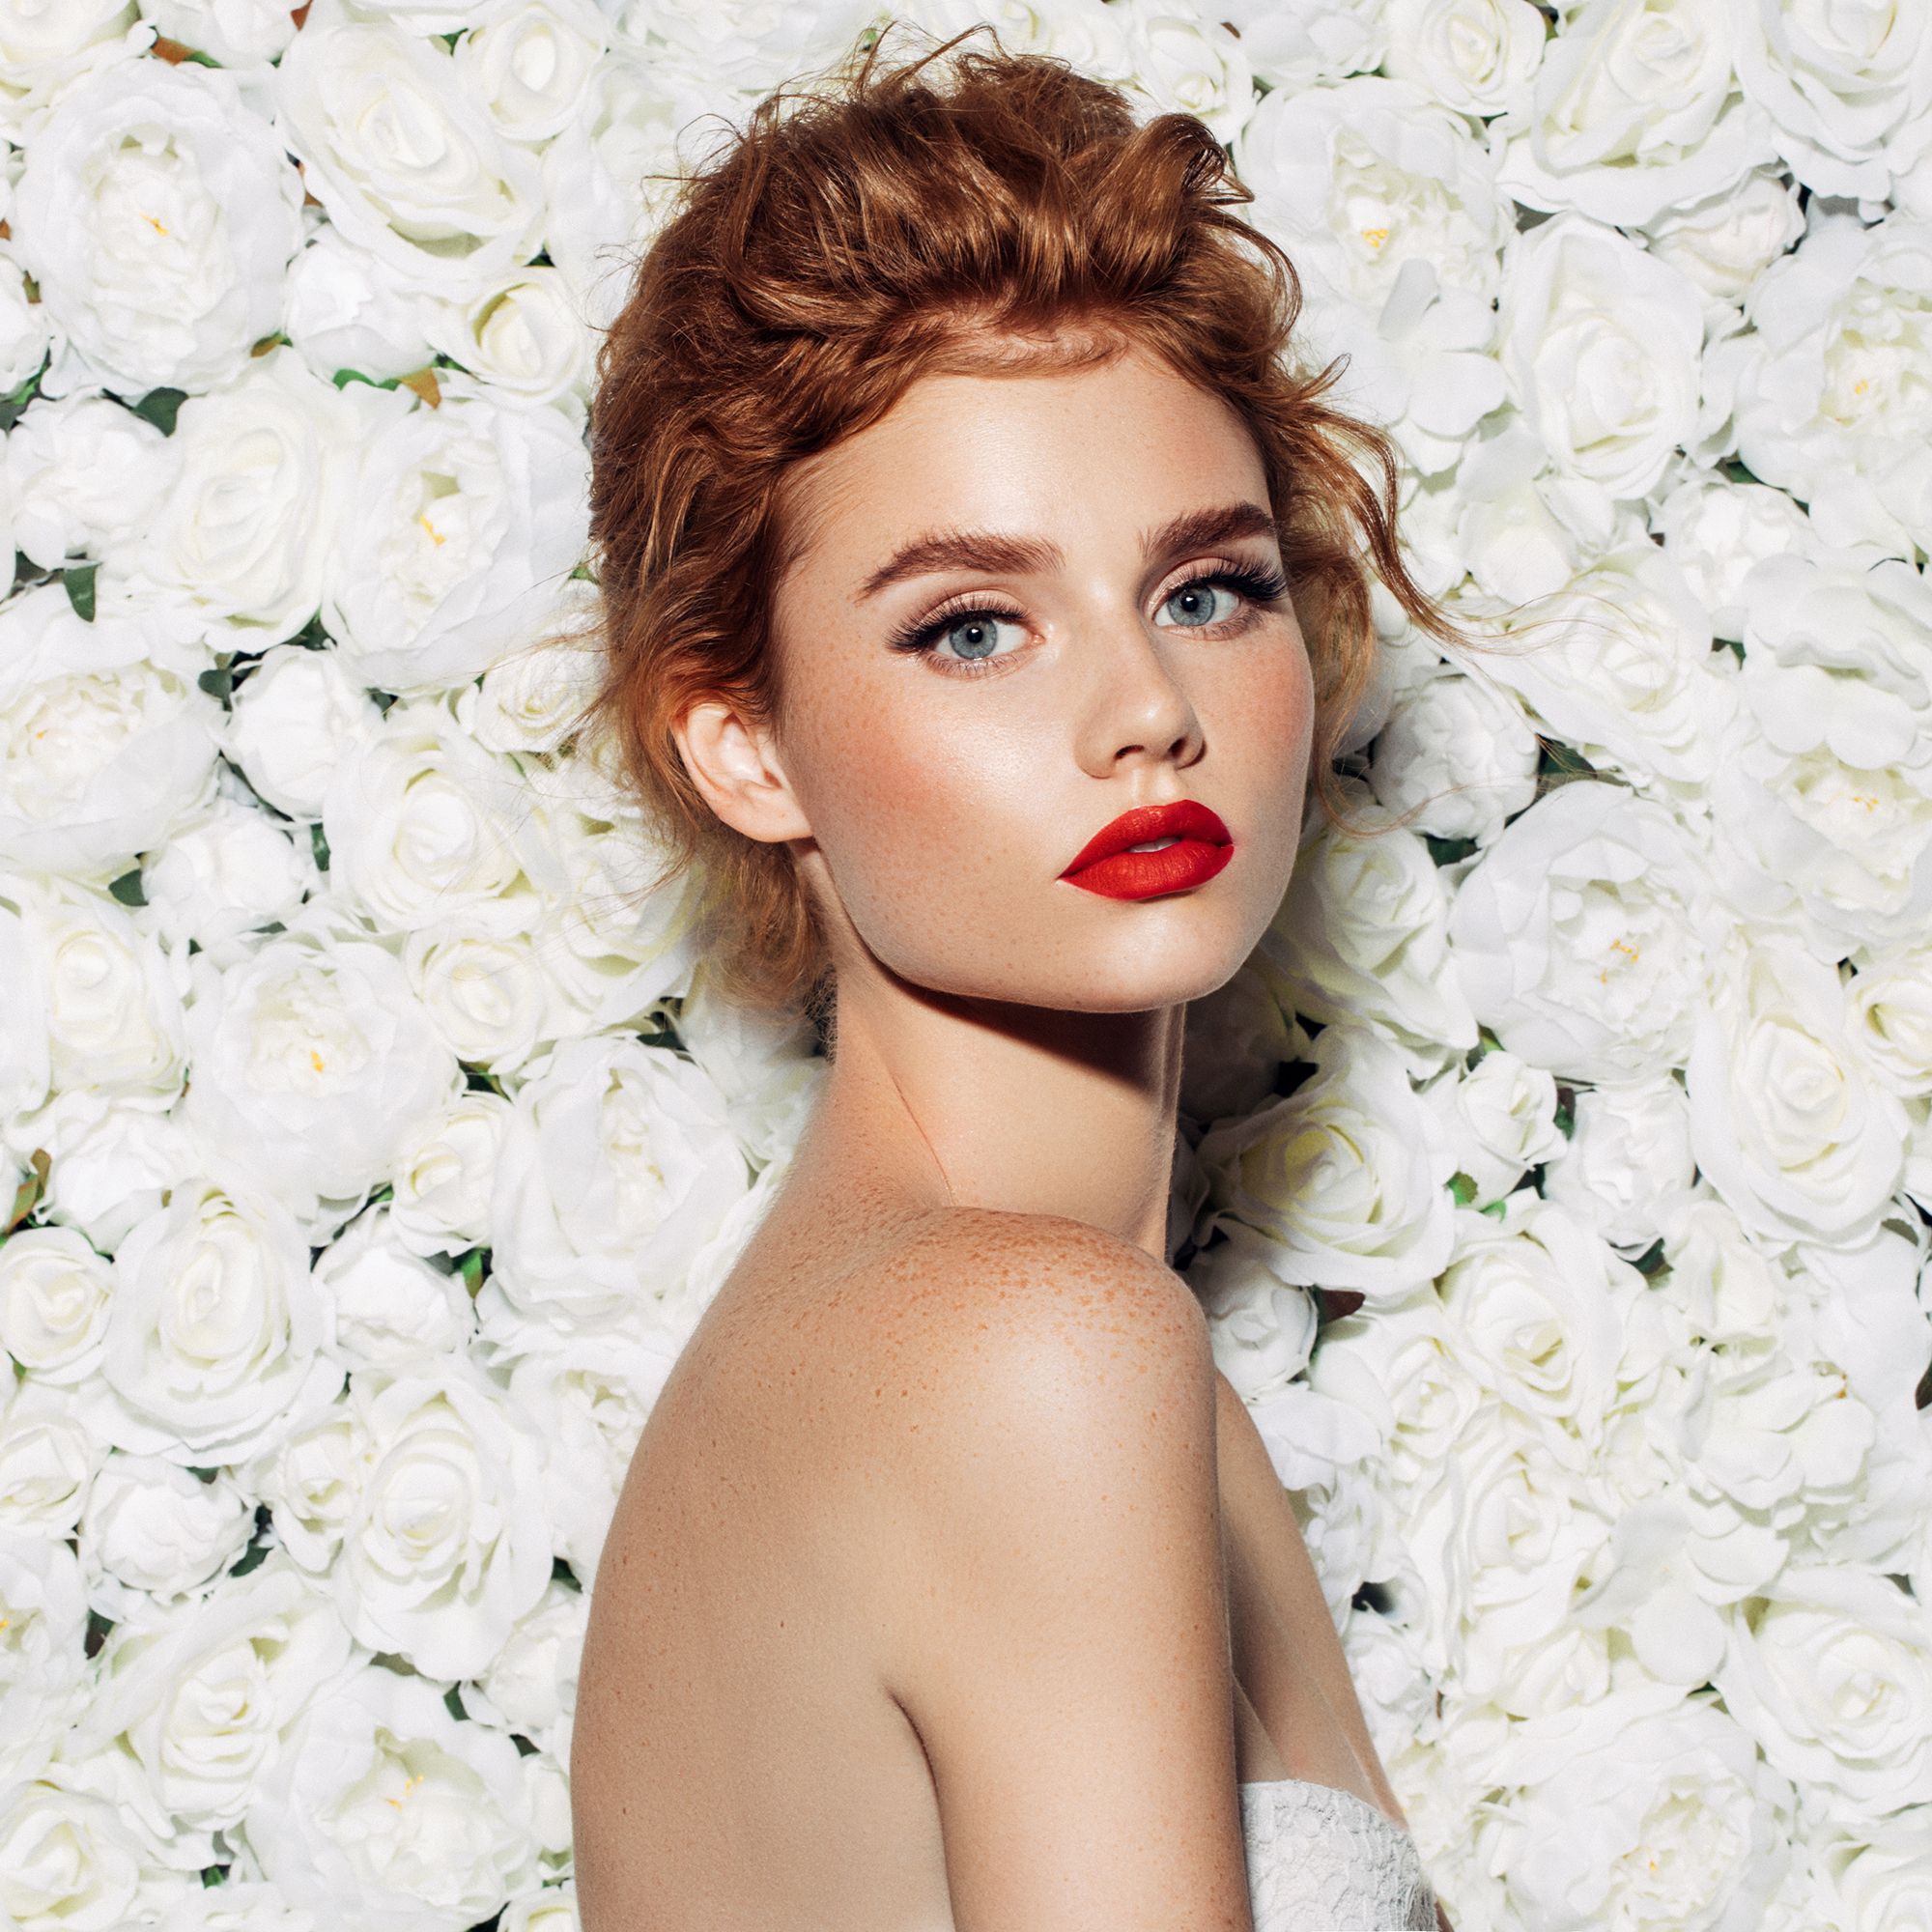 Bold lips for brides: dos and don'ts of red lipstick on your wedding day